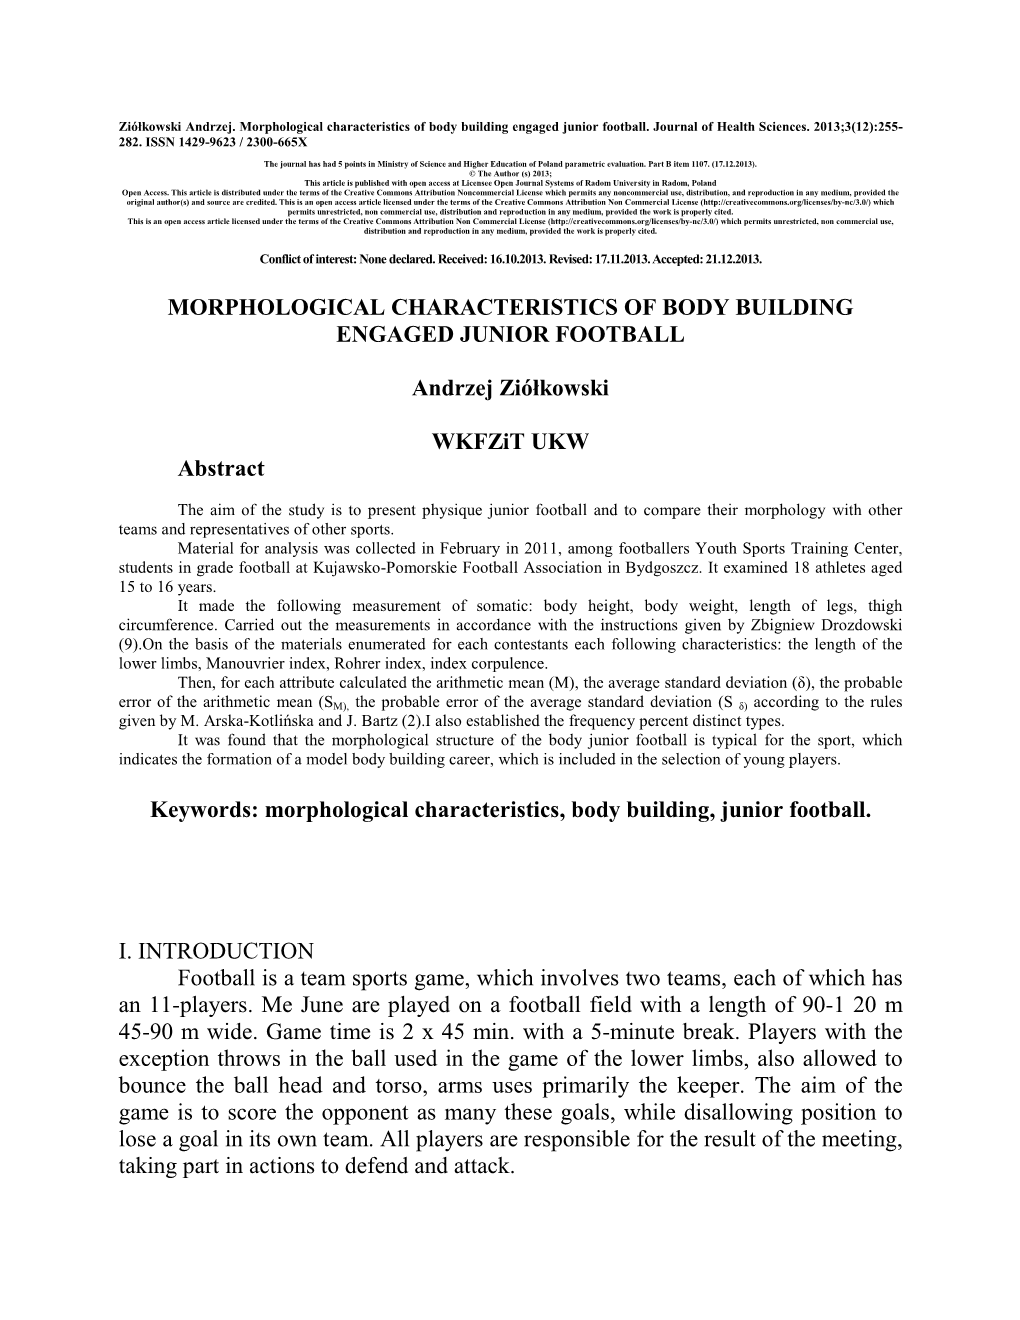 Morphological Characteristics of Body Building Engaged Junior Football